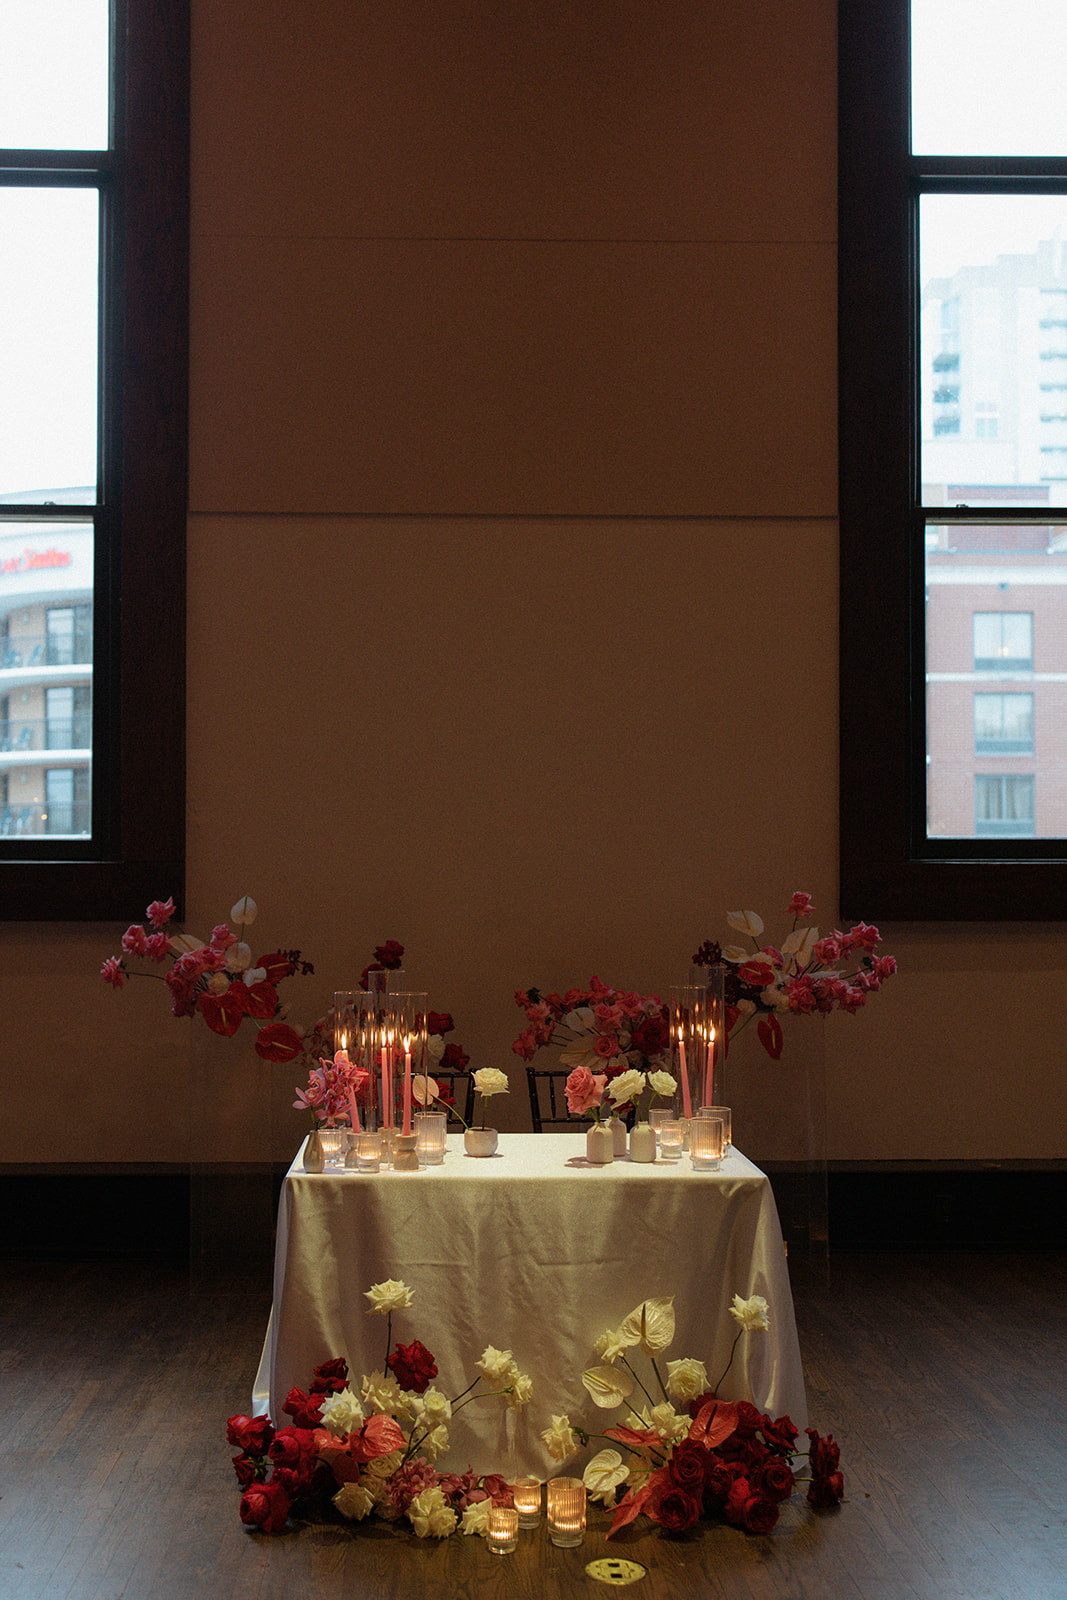 Sweetheart Table Decorated with Full Bloom Flowers in Red, Pink, and White